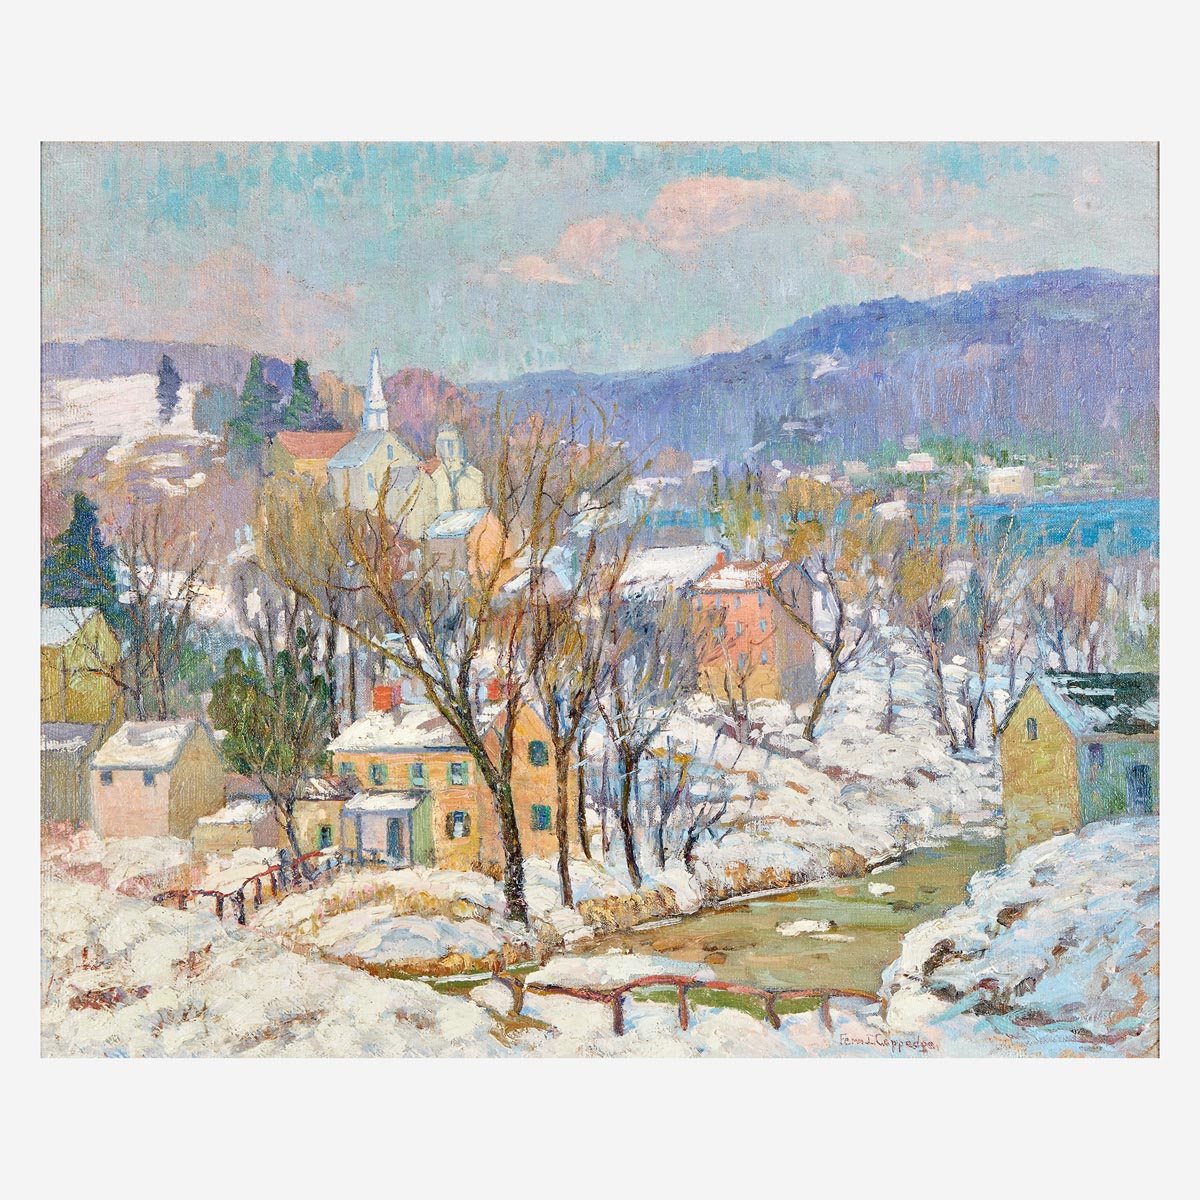 Fern Coppedge, Snowy Country Side